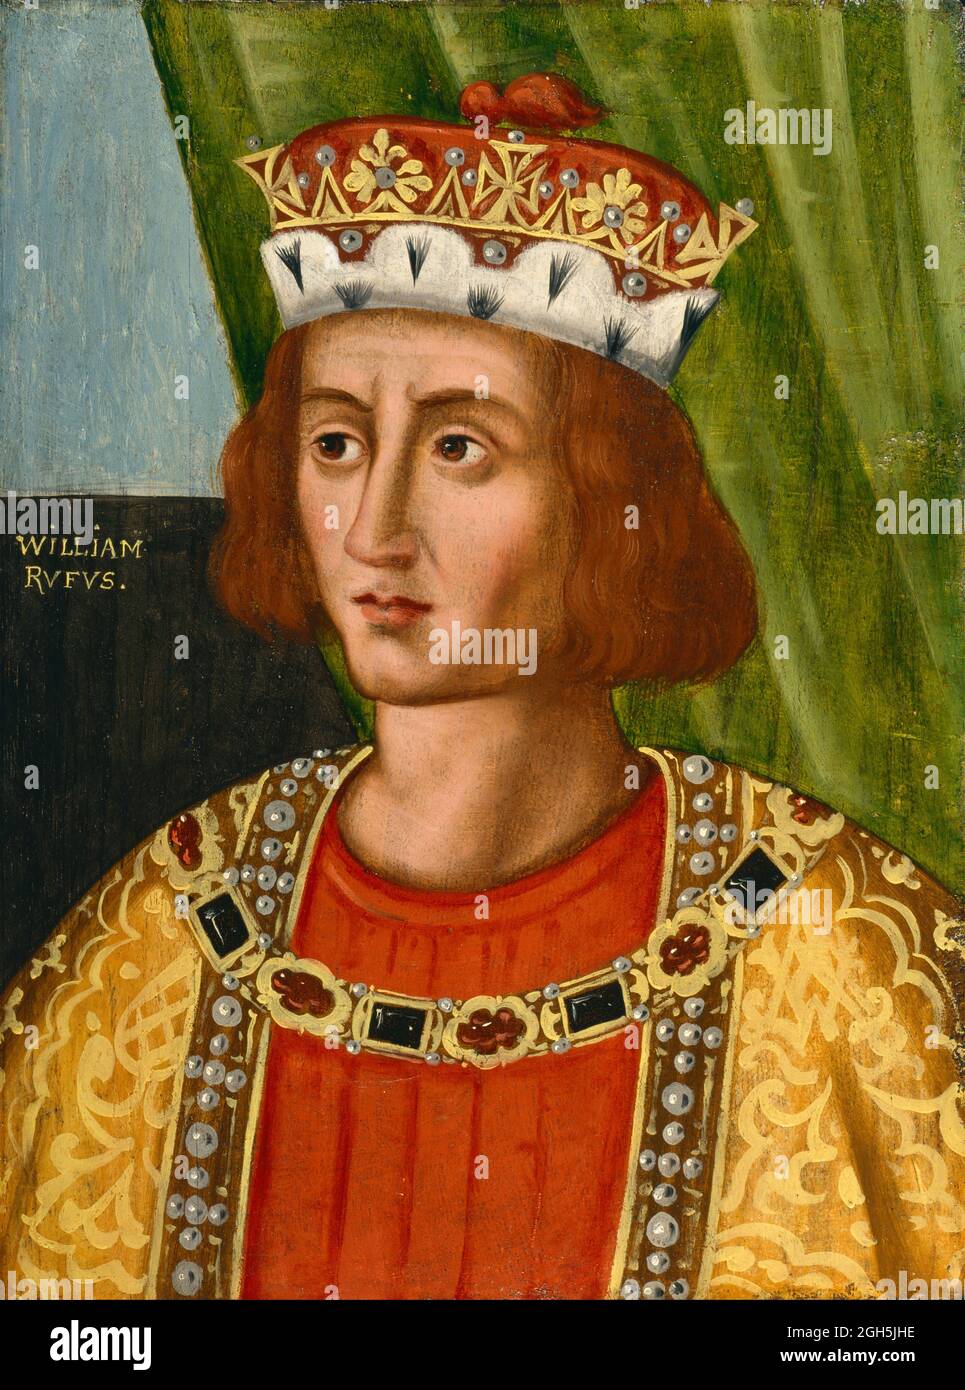 A portrait of William II (William Rufus) who was King of England from 1087 until 1100 Stock Photo